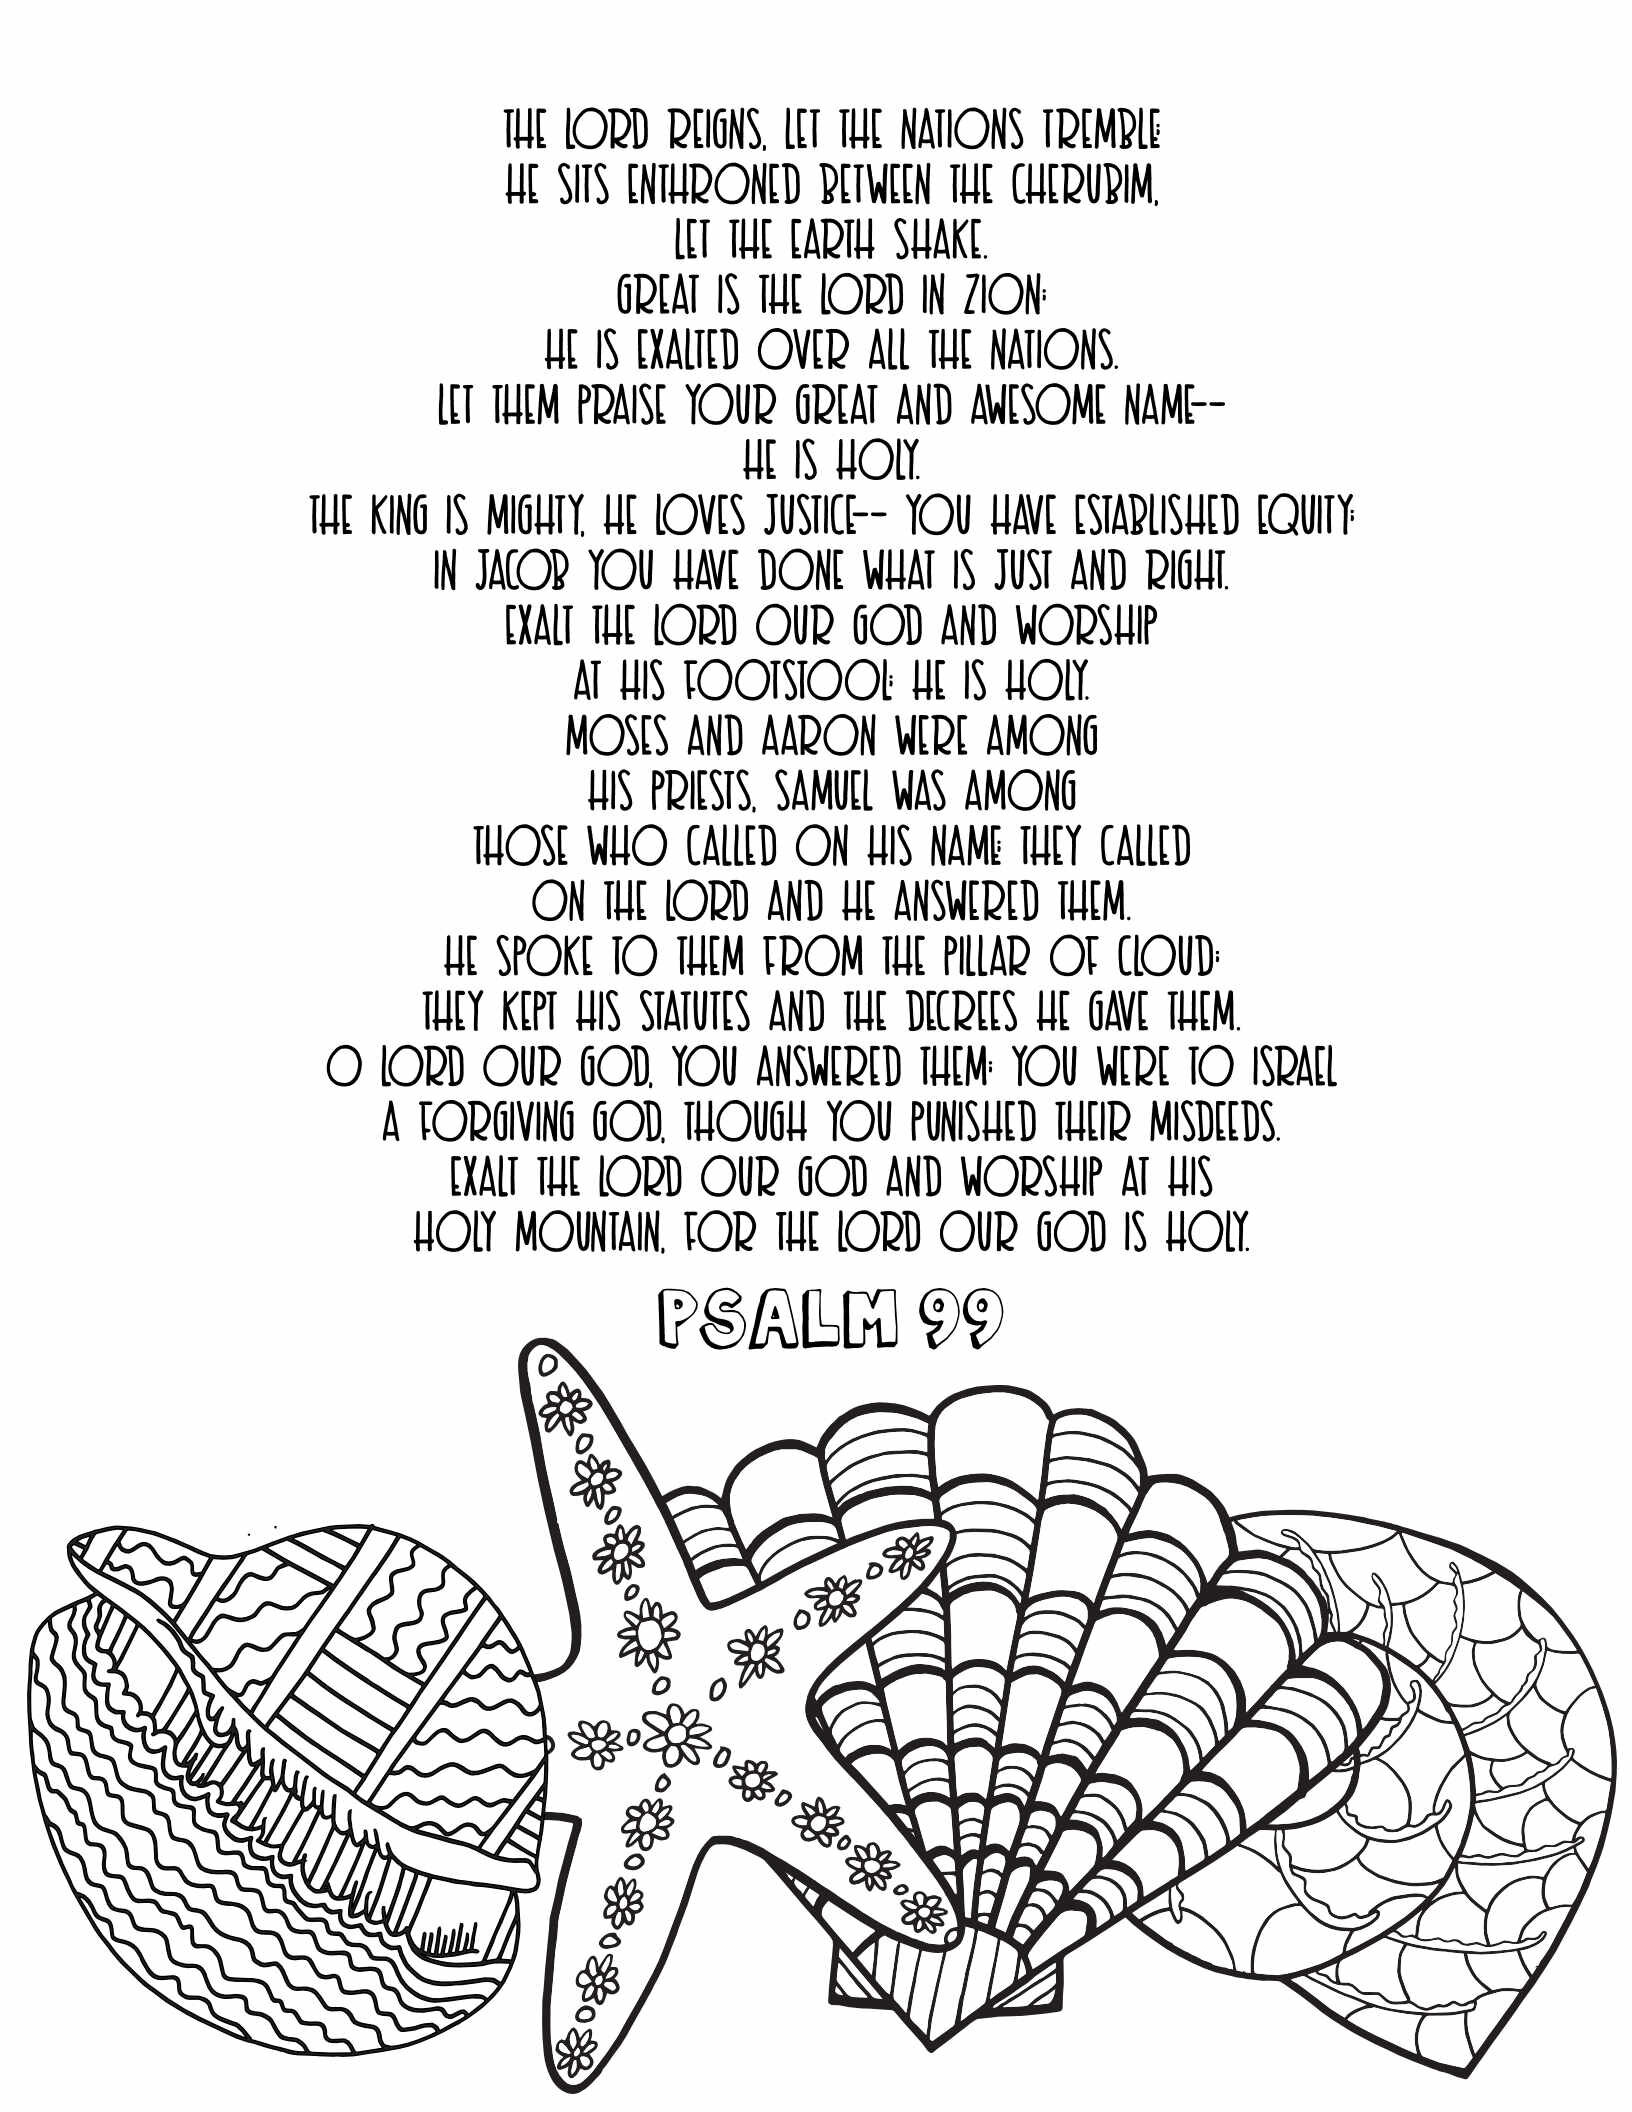 10 Free Printable Psalm Coloring Pages - Download and Color Adult Scripture - Psalm 99CLICK HERE TO DOWNLOAD THIS PAGE FREE